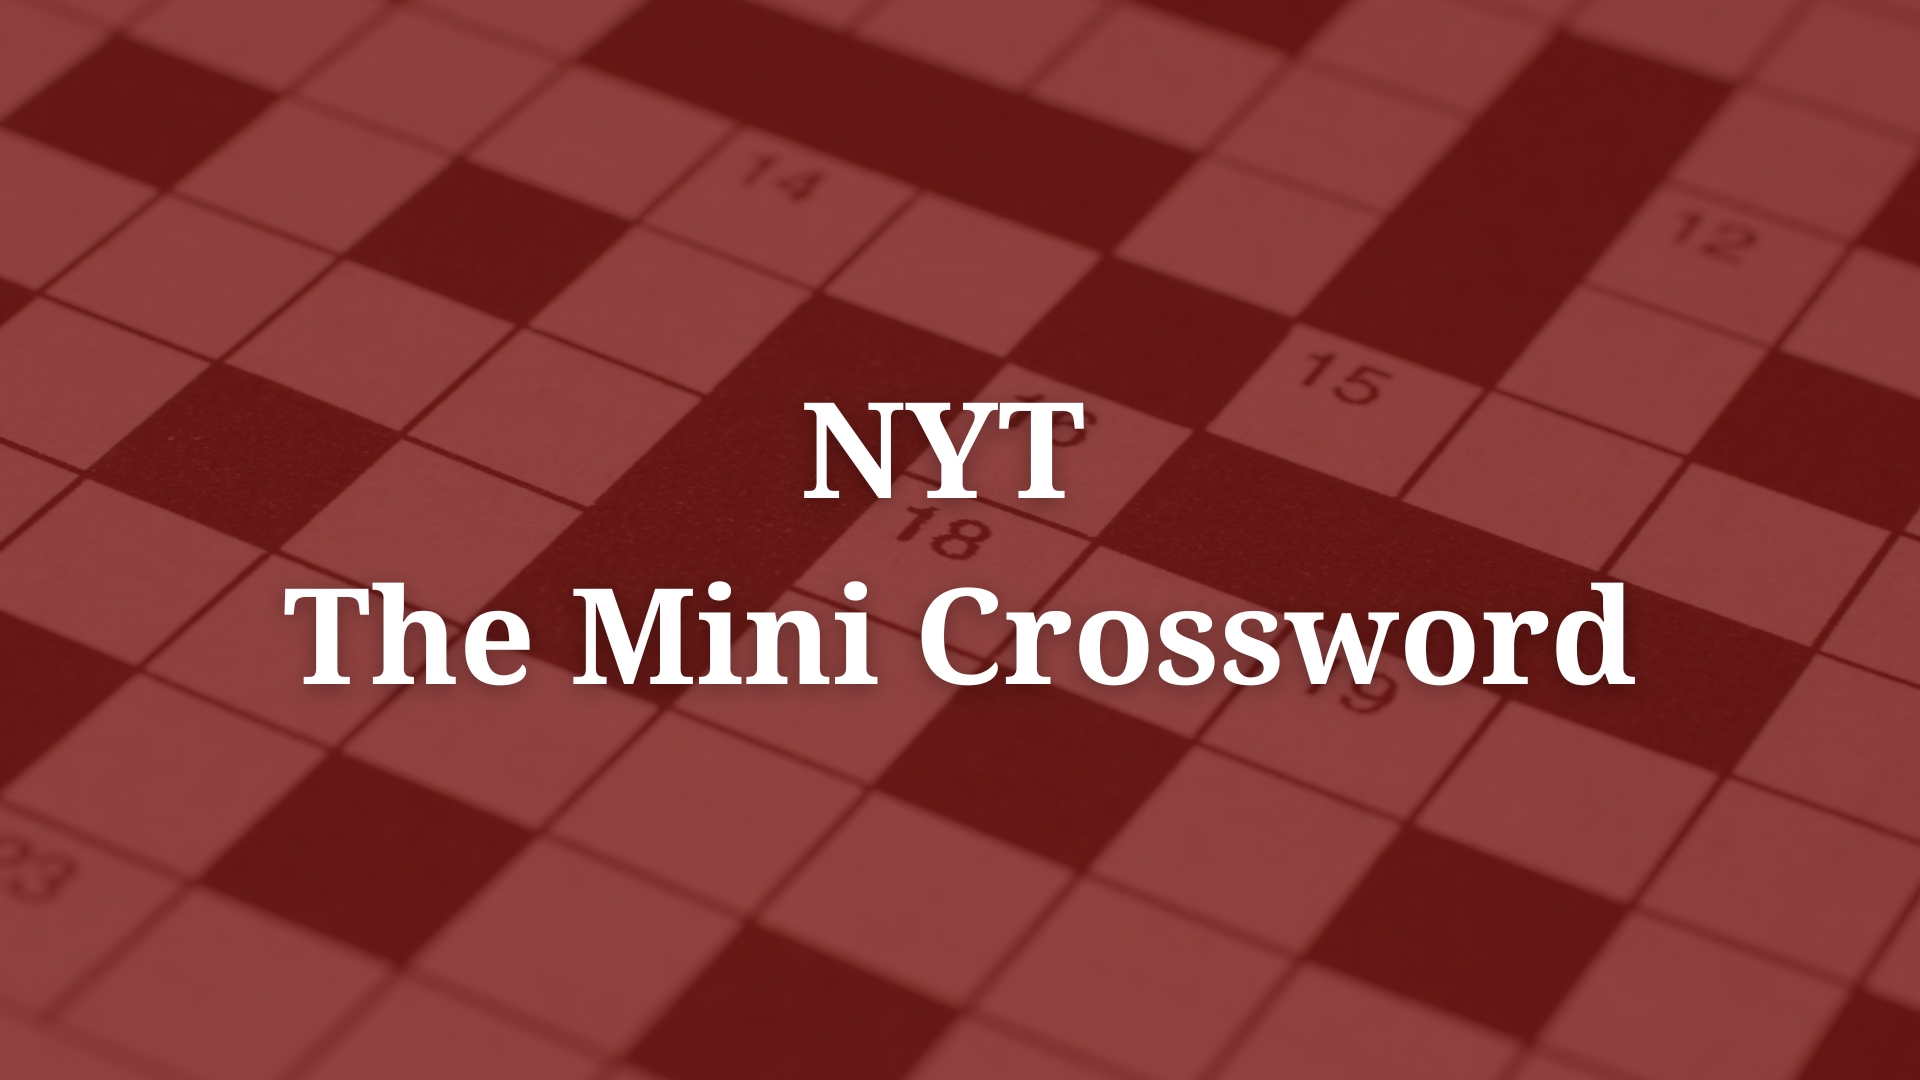 quot Screenwriter Sorkin quot NYT Mini Crossword Clue Answer and Hints